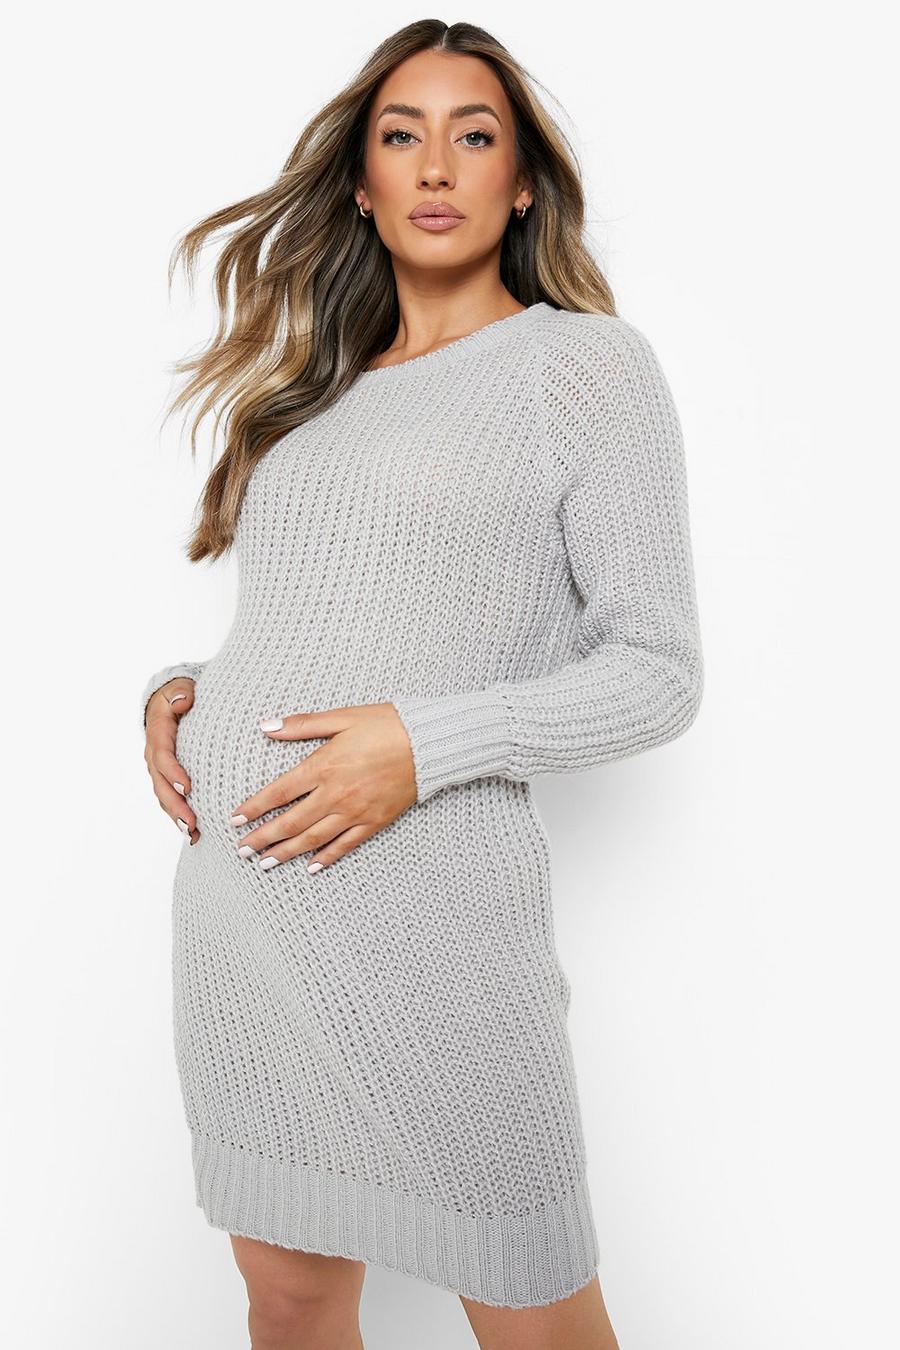 Grey marl Maternity Soft Knit Sweater Dress image number 1